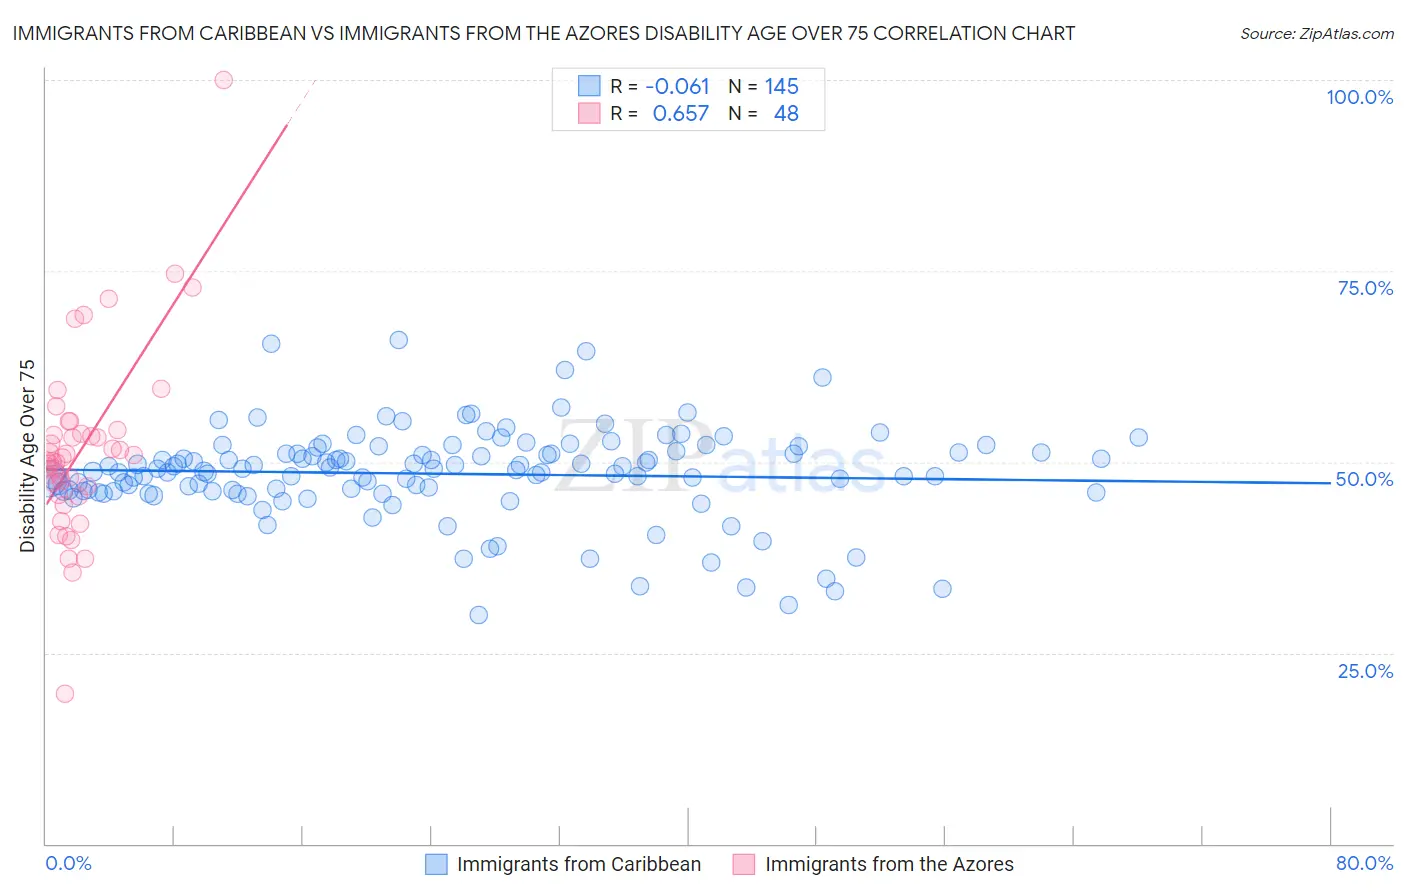 Immigrants from Caribbean vs Immigrants from the Azores Disability Age Over 75